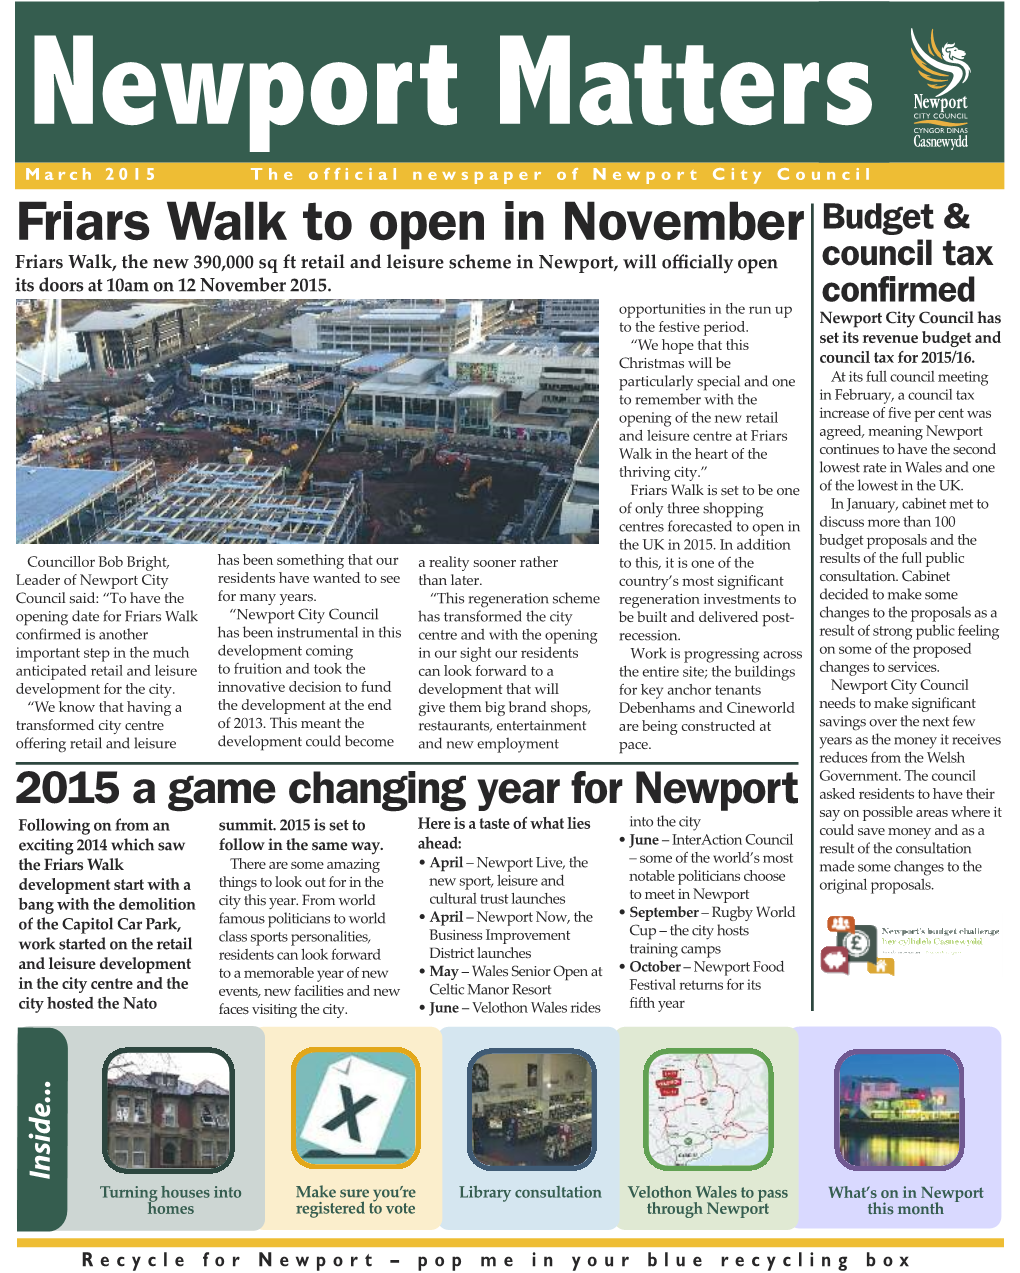 Friars Walk to Open in November